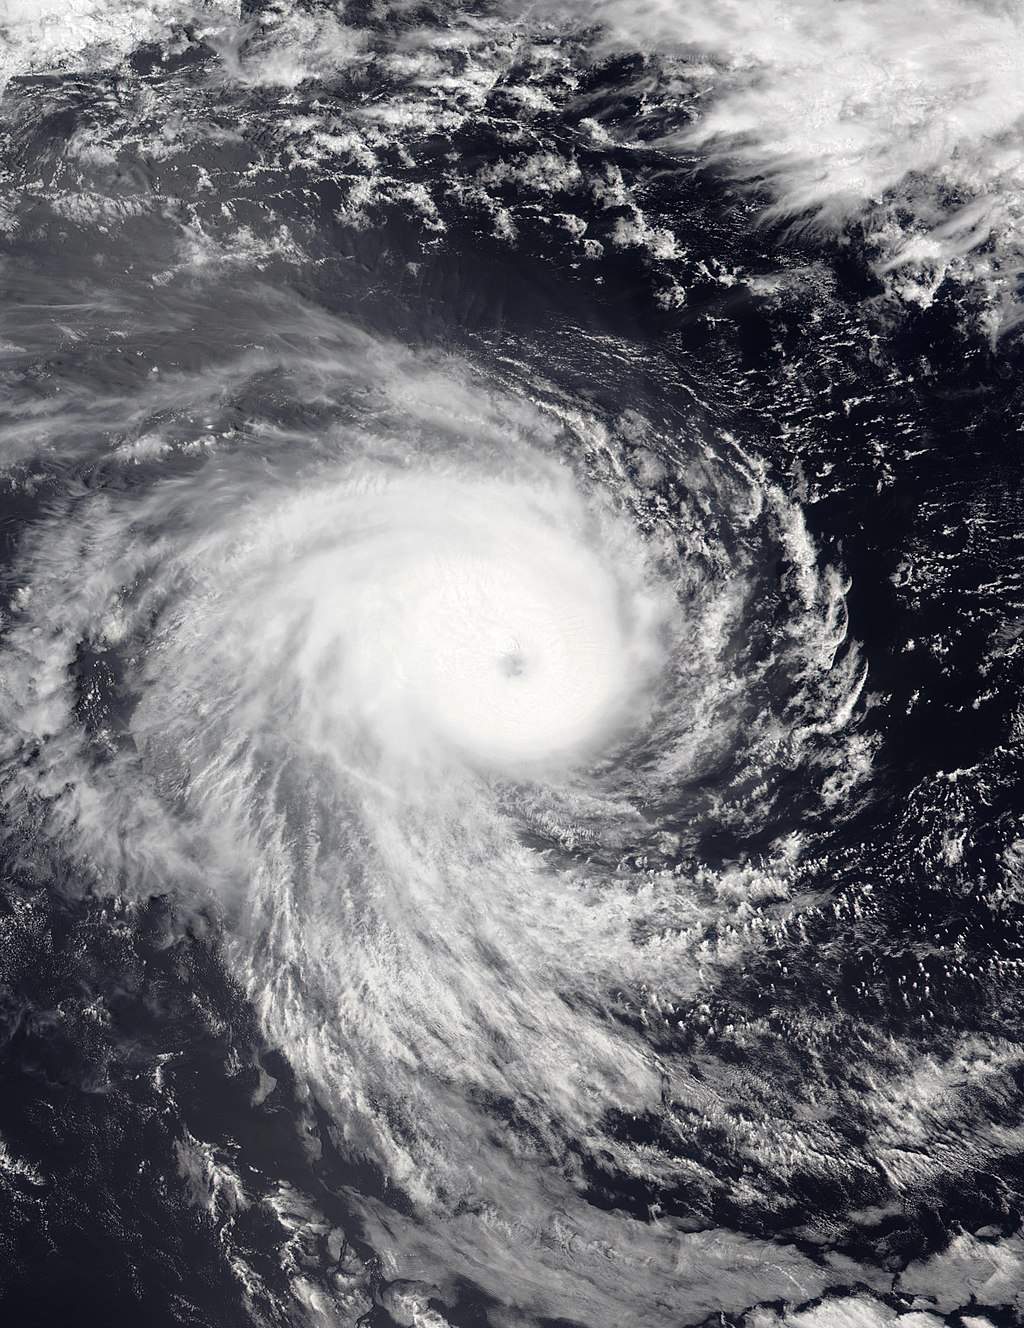 Fig. 7: Cyclone Freddy over the Western Indian Ocean on February 12; Source: Wikipedia